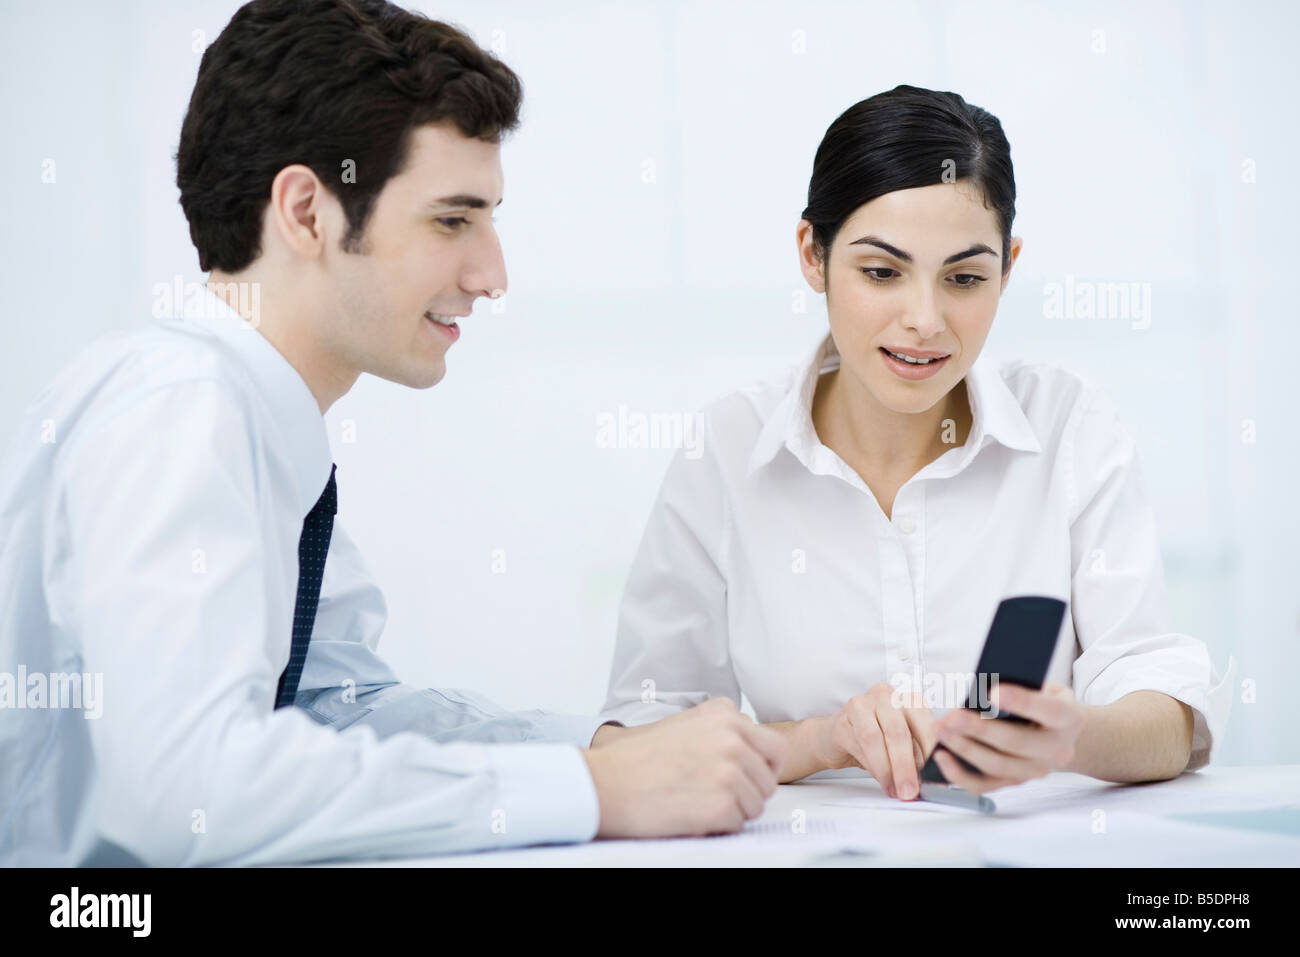 Professionals looking at cell phone together, smiling Stock Photo